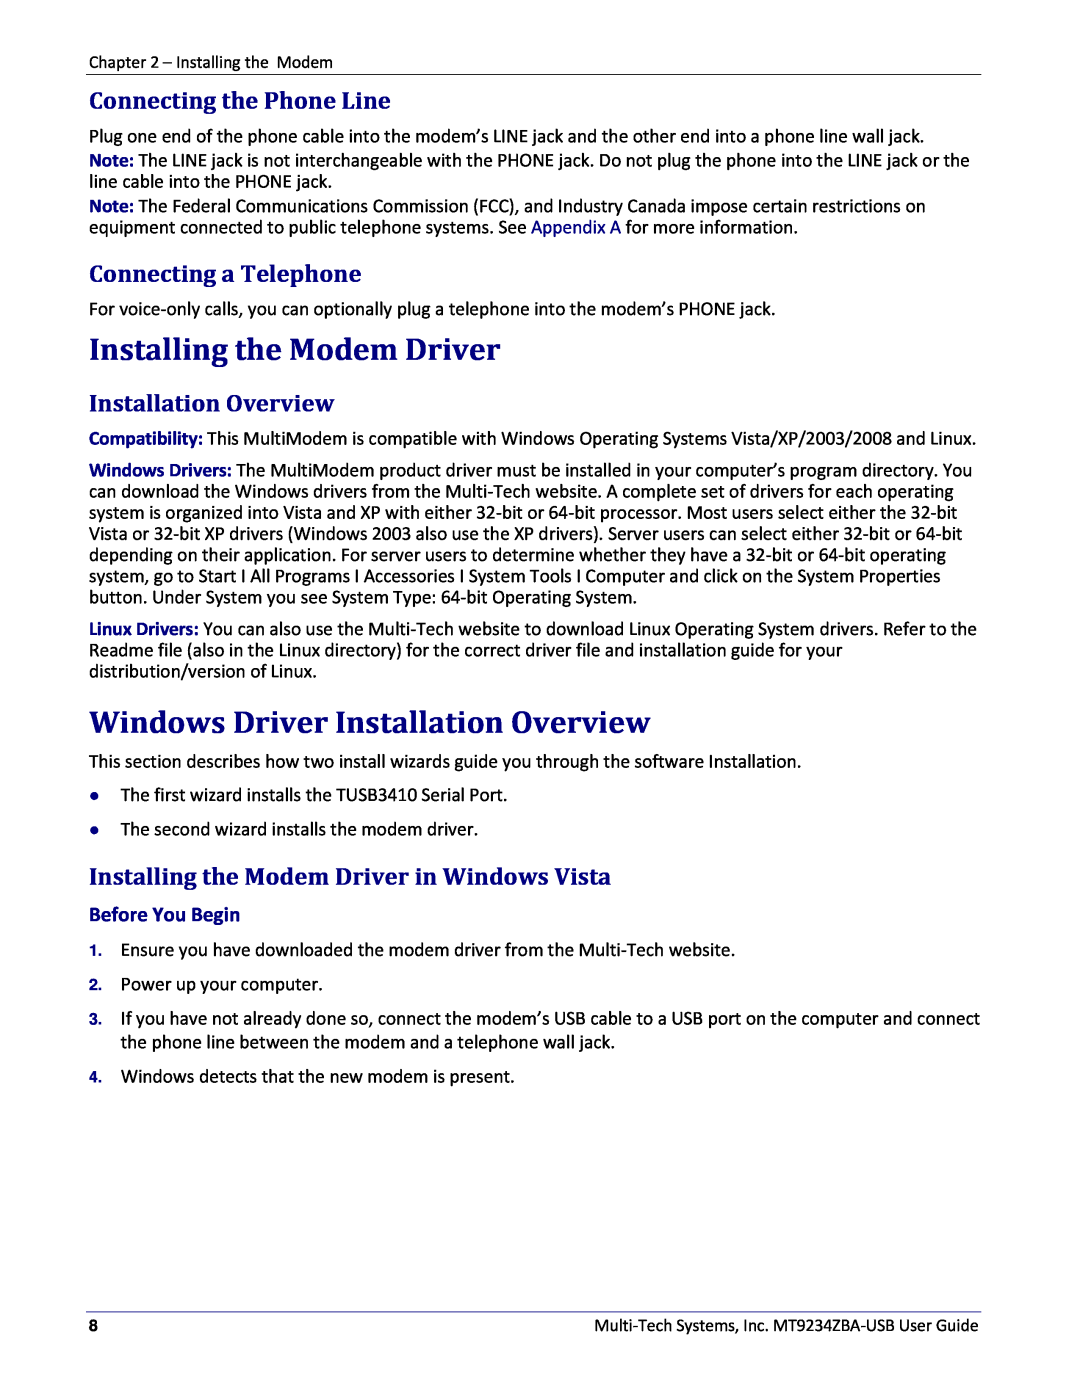 Multitech MT9234ZBA-USB manual Installing the Modem Driver, Windows Driver Installation Overview, Connecting the Phone Line 